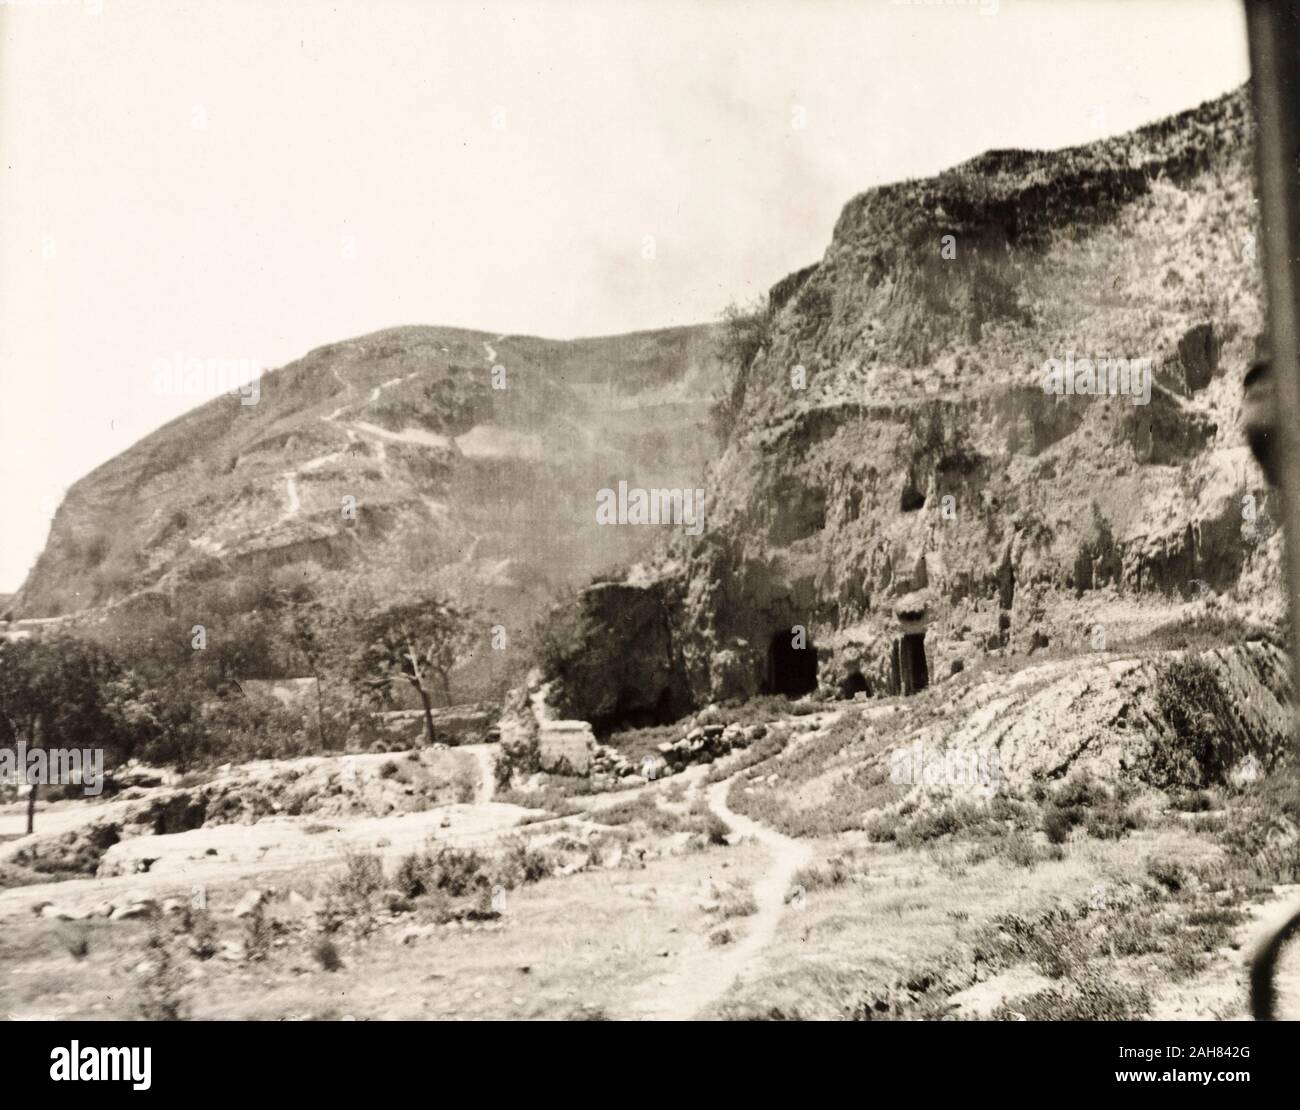 China, A number of cave dwellings, built into a cliff face on the banks of the Yellow River. Original manuscript caption: Cave dwellings on banks of Yellow River Central China, [1909]. 1998/028/1/1/191. Stock Photo